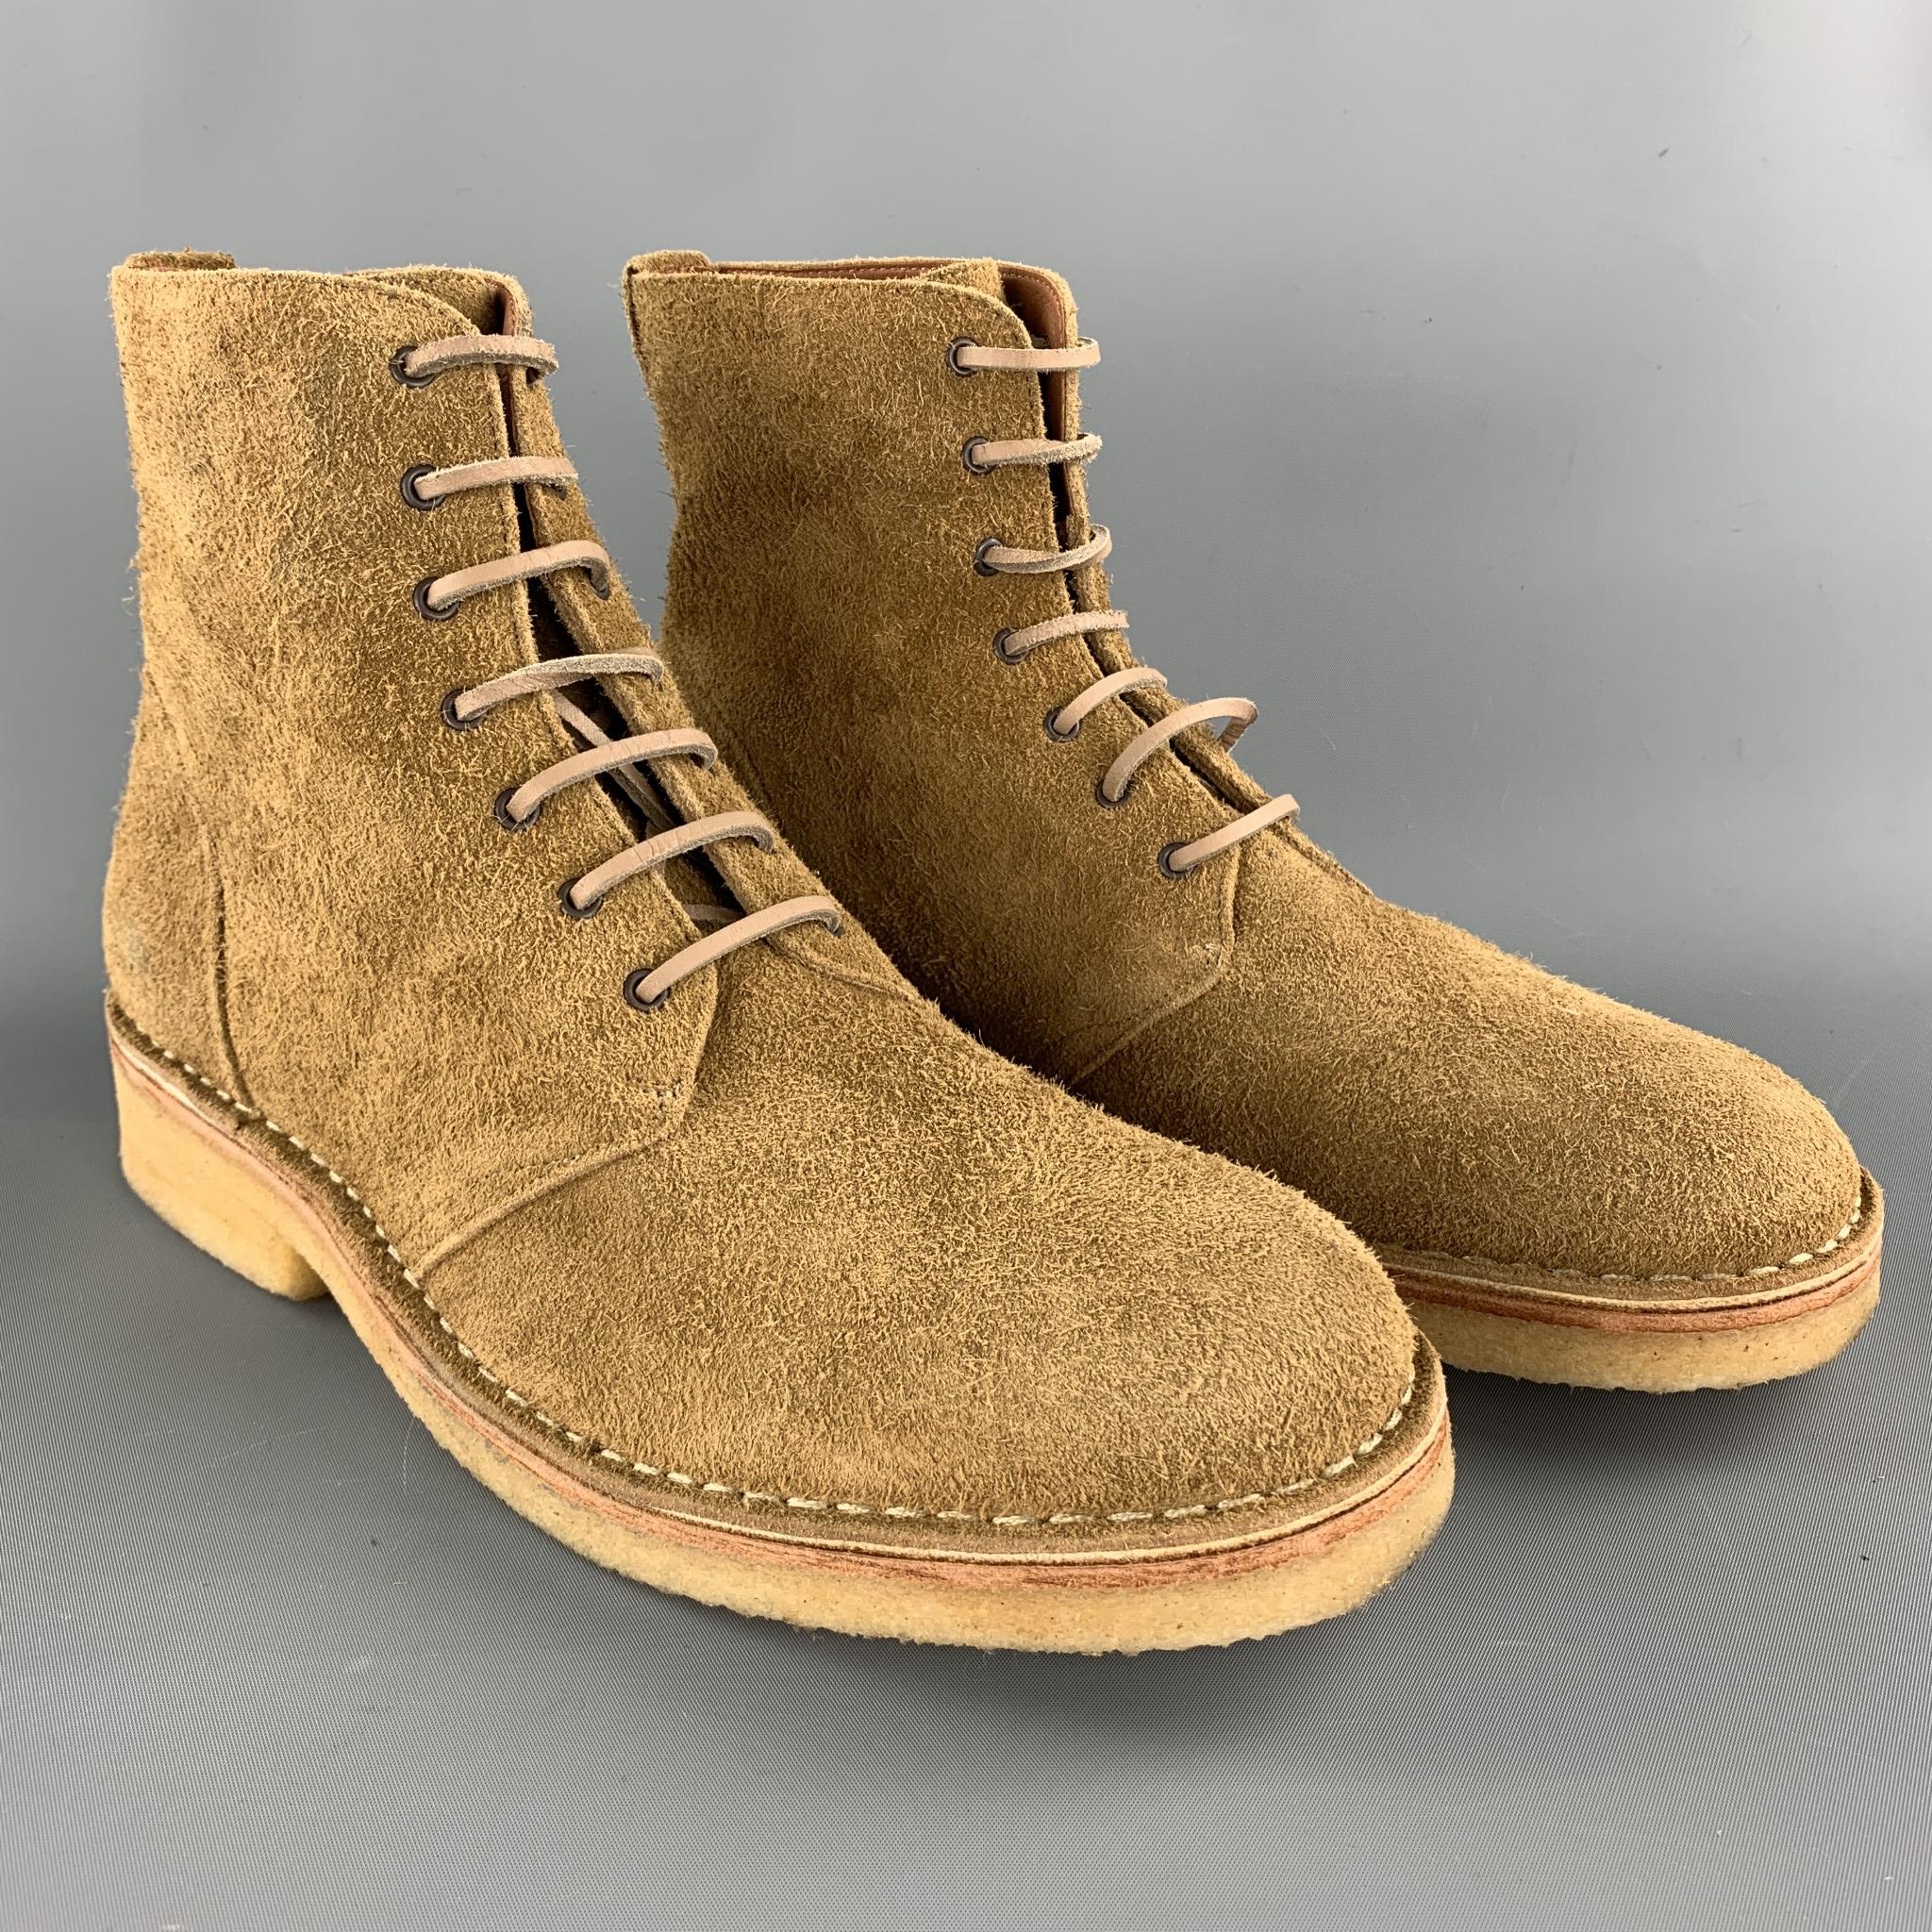 Men's RAG & BONE ankle boots comes in a tan textured suede featuring a military lace up style and a crepe sole. Comes with box. Minor wear. Made in Portugal.

Very Good Pre-Owned Condition.
Marked: EU 43

Measurements:

Length: 12 in. 
Width: 4 in.